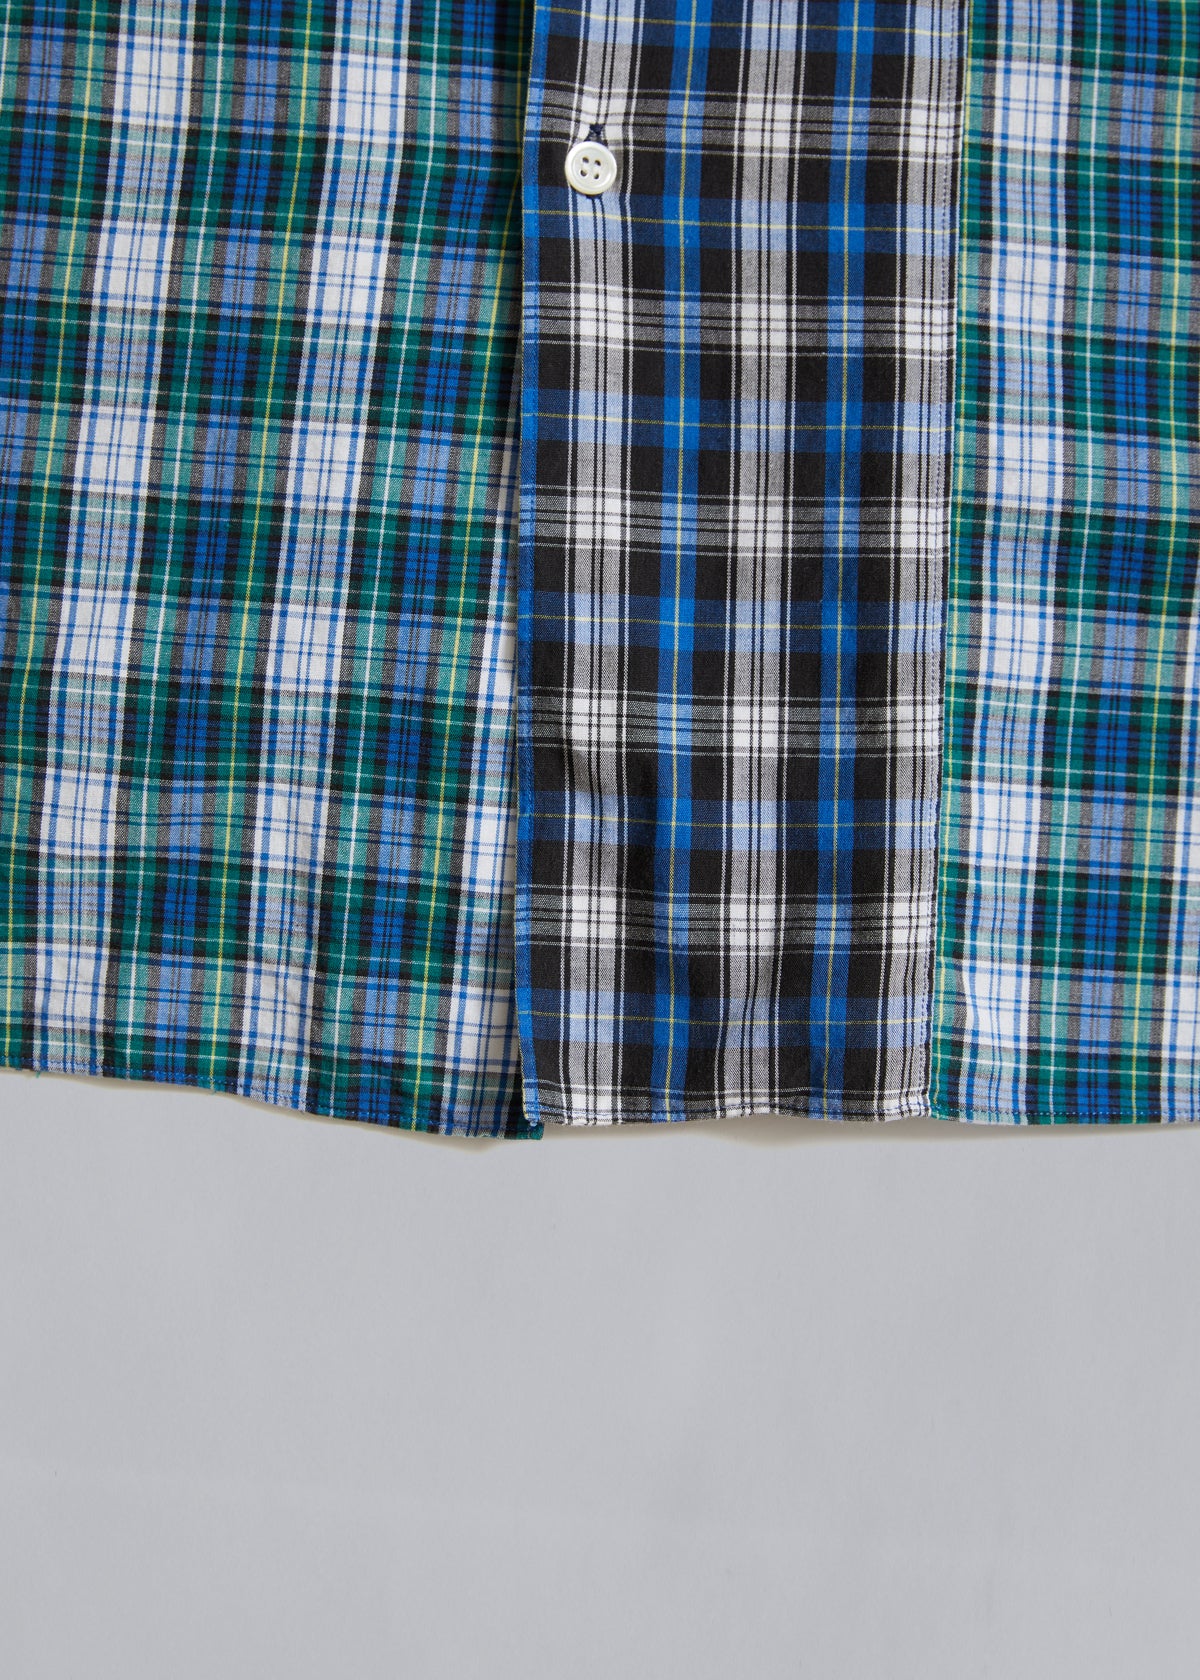 CDG Homme Optical Illusion Line Checkered Shirt 1980's - Large